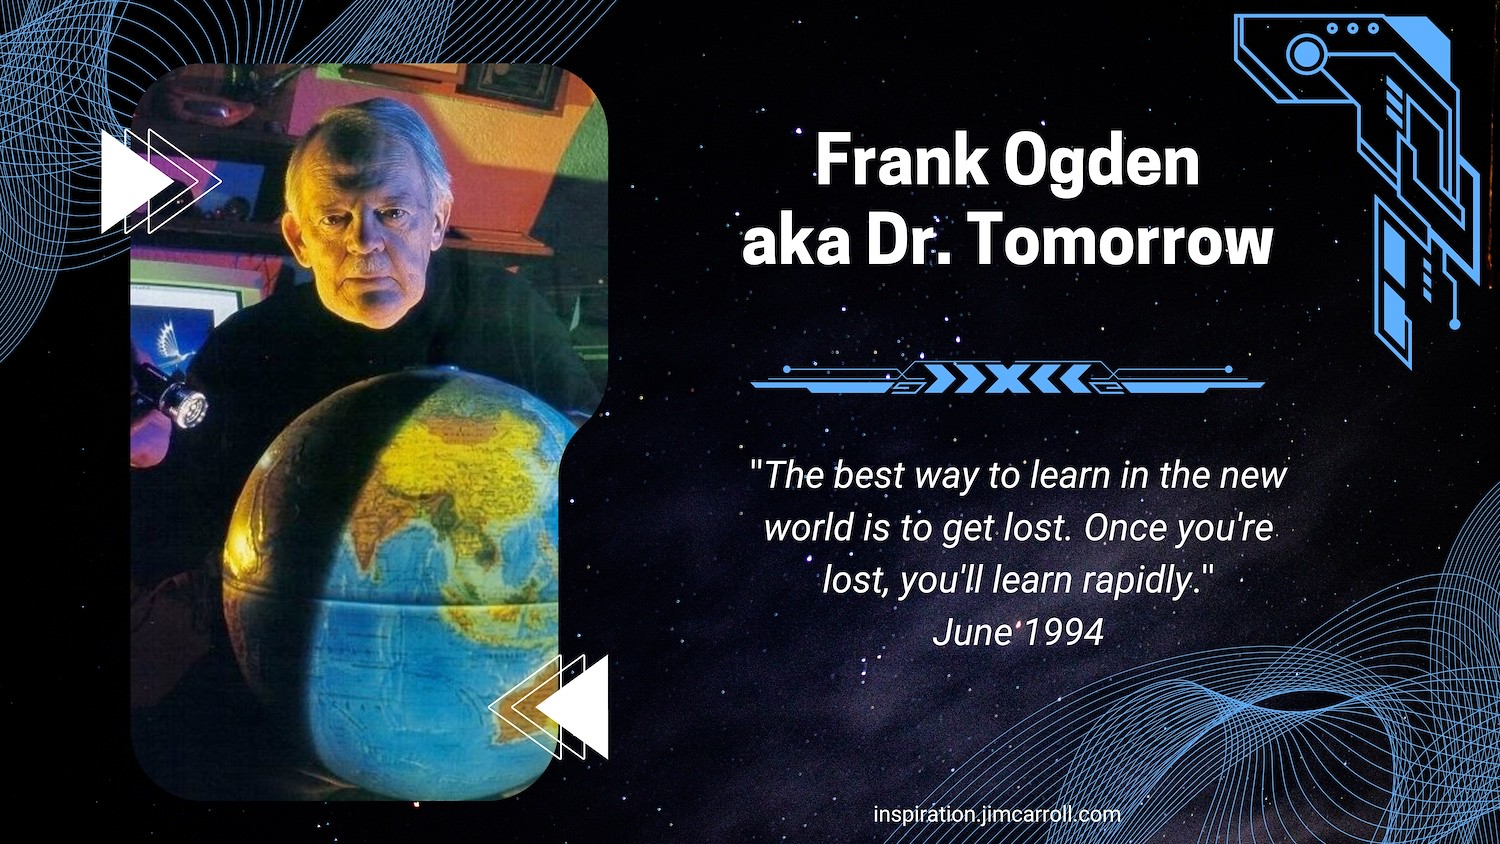 "The best way to learn in the new world is to get lost. Once you're lost, you'll learn rapidly." - Dr. Tomorrow, 1994